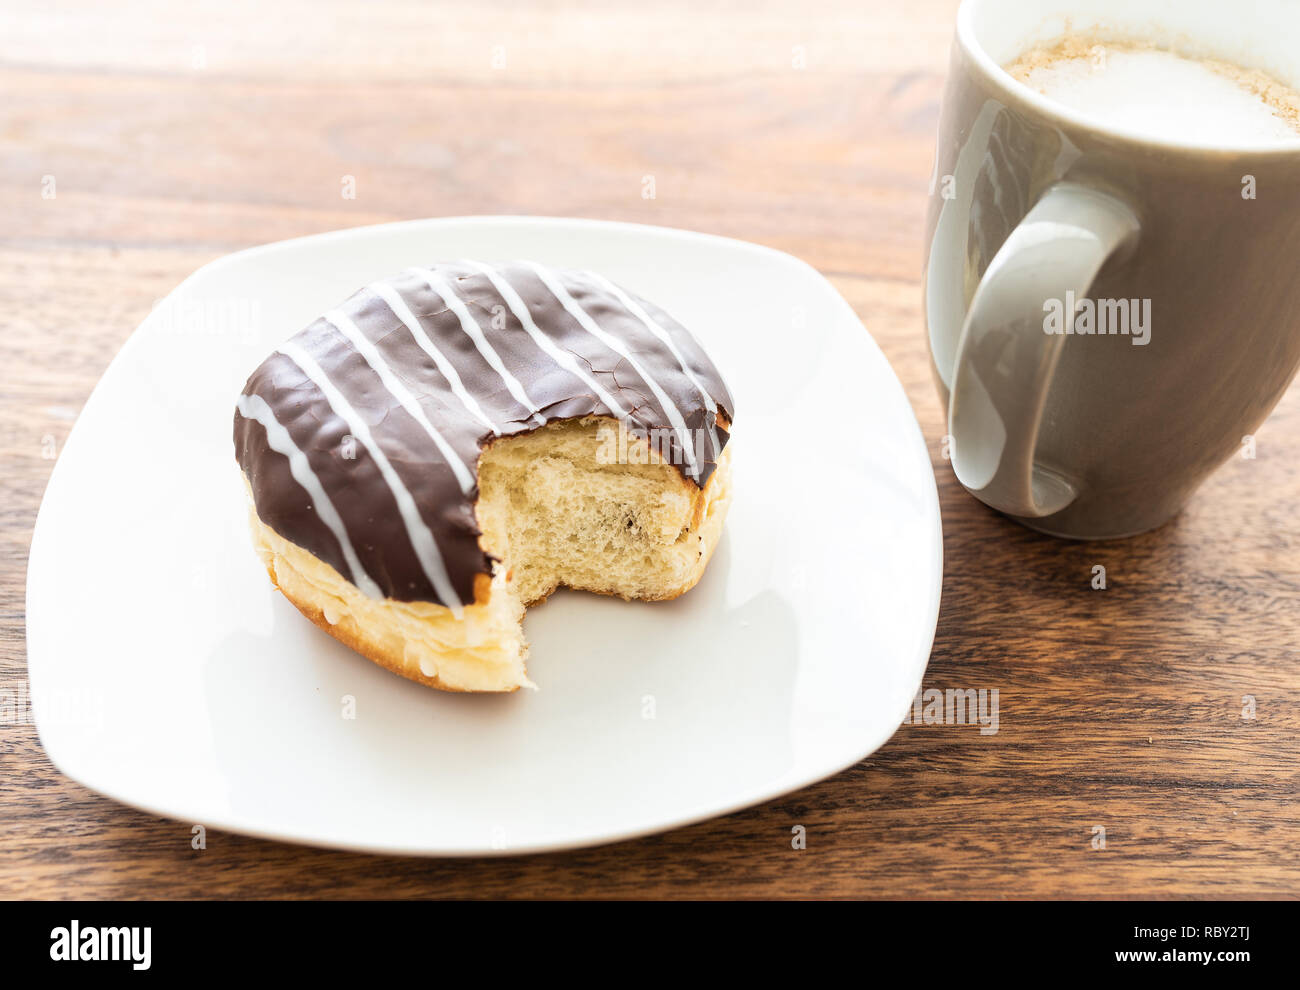 high angle view of chocolate coated jelly doughnut on wooden table Stock Photo